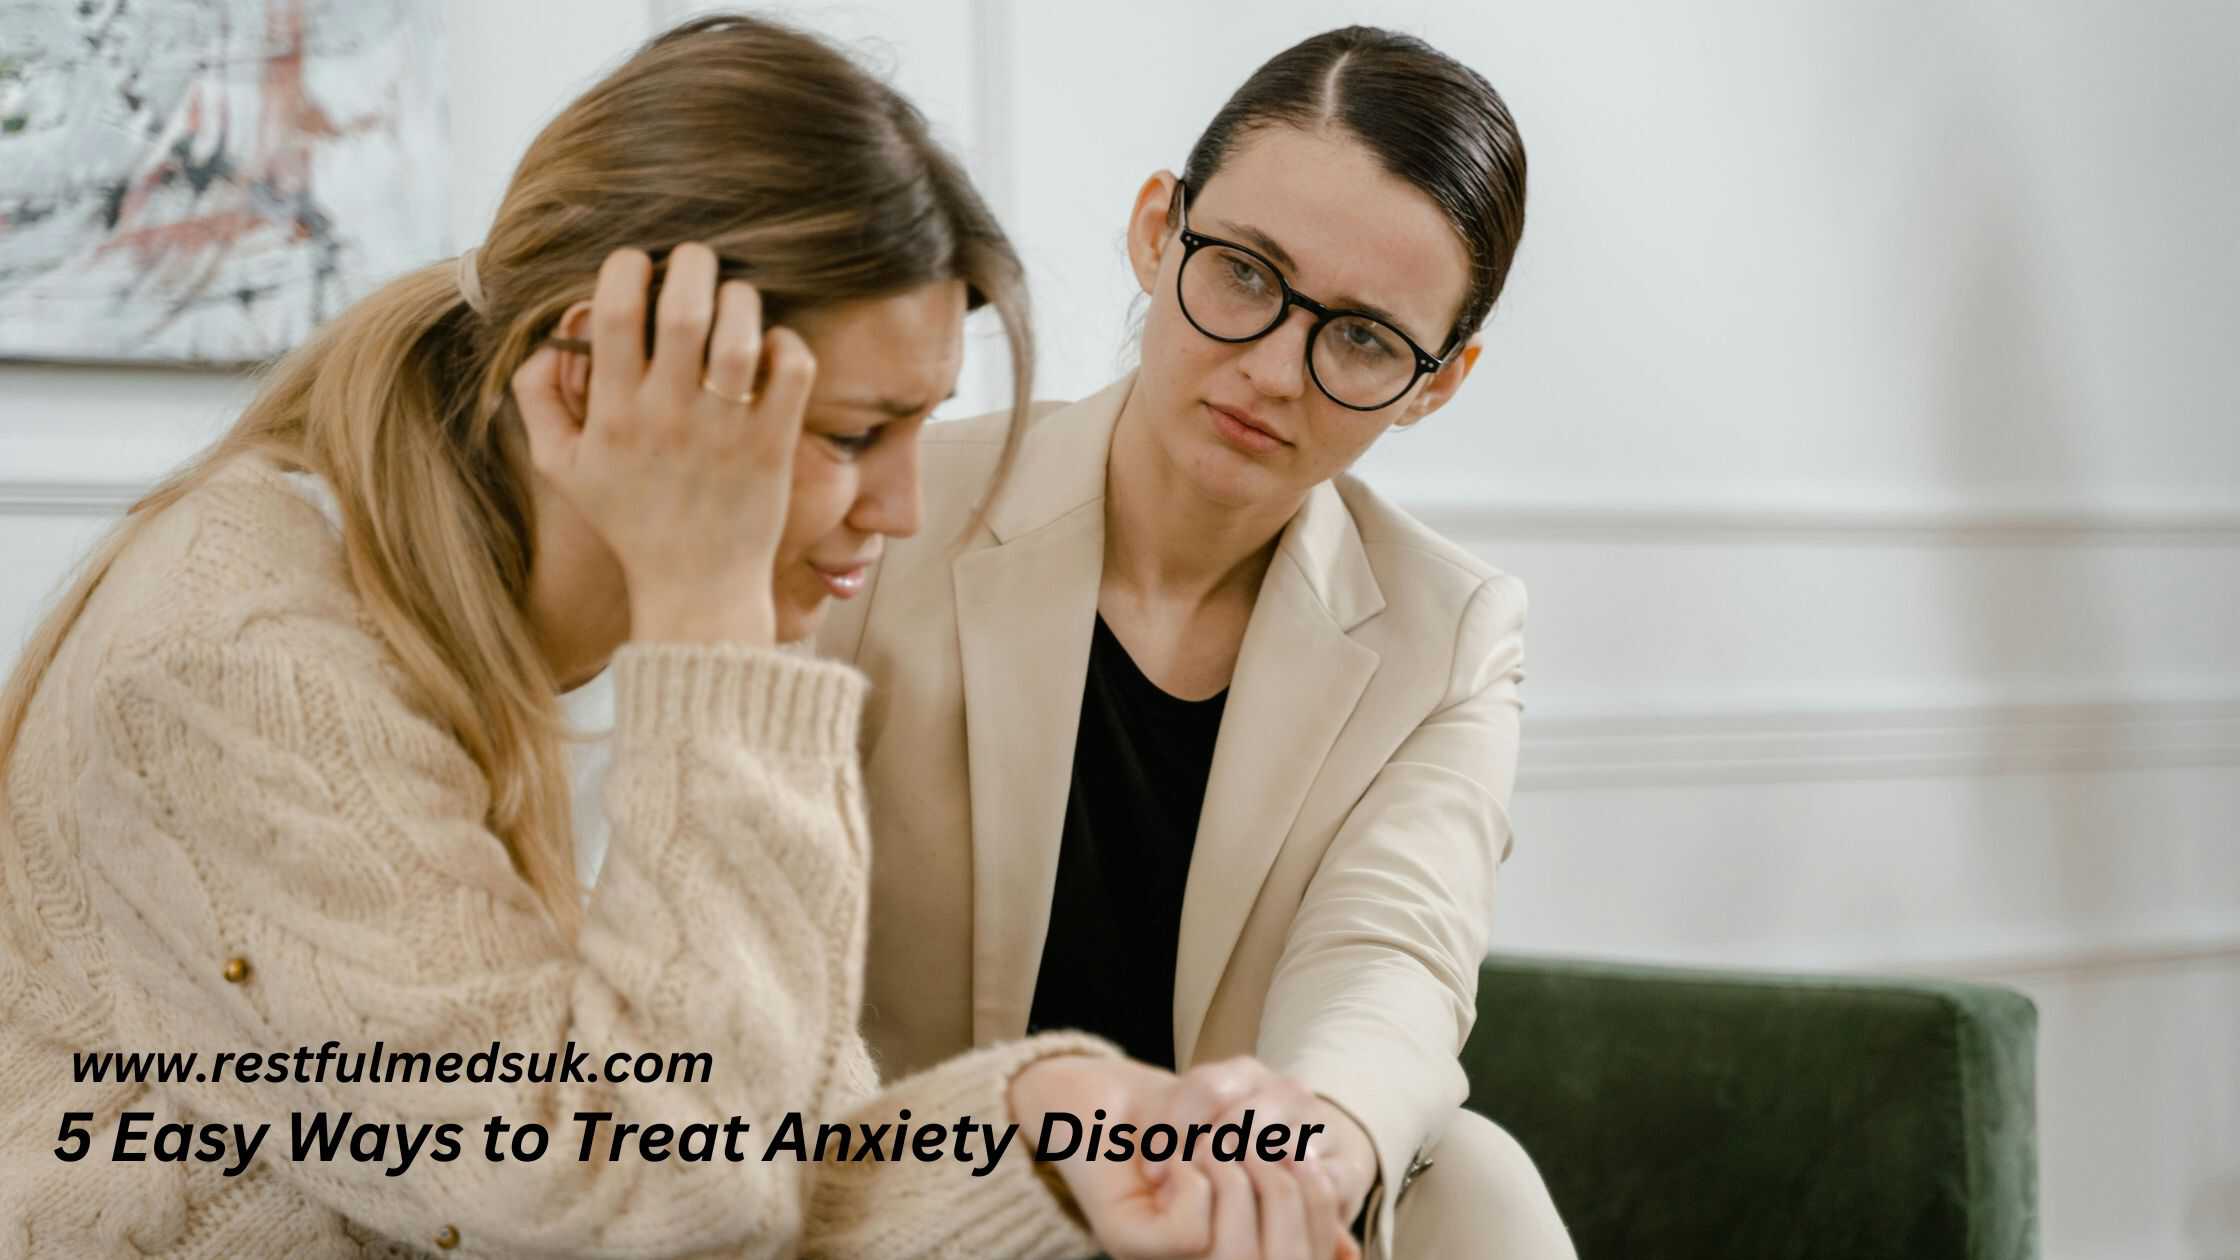 What Are 5 Easy Ways to Treat Anxiety Disorder?